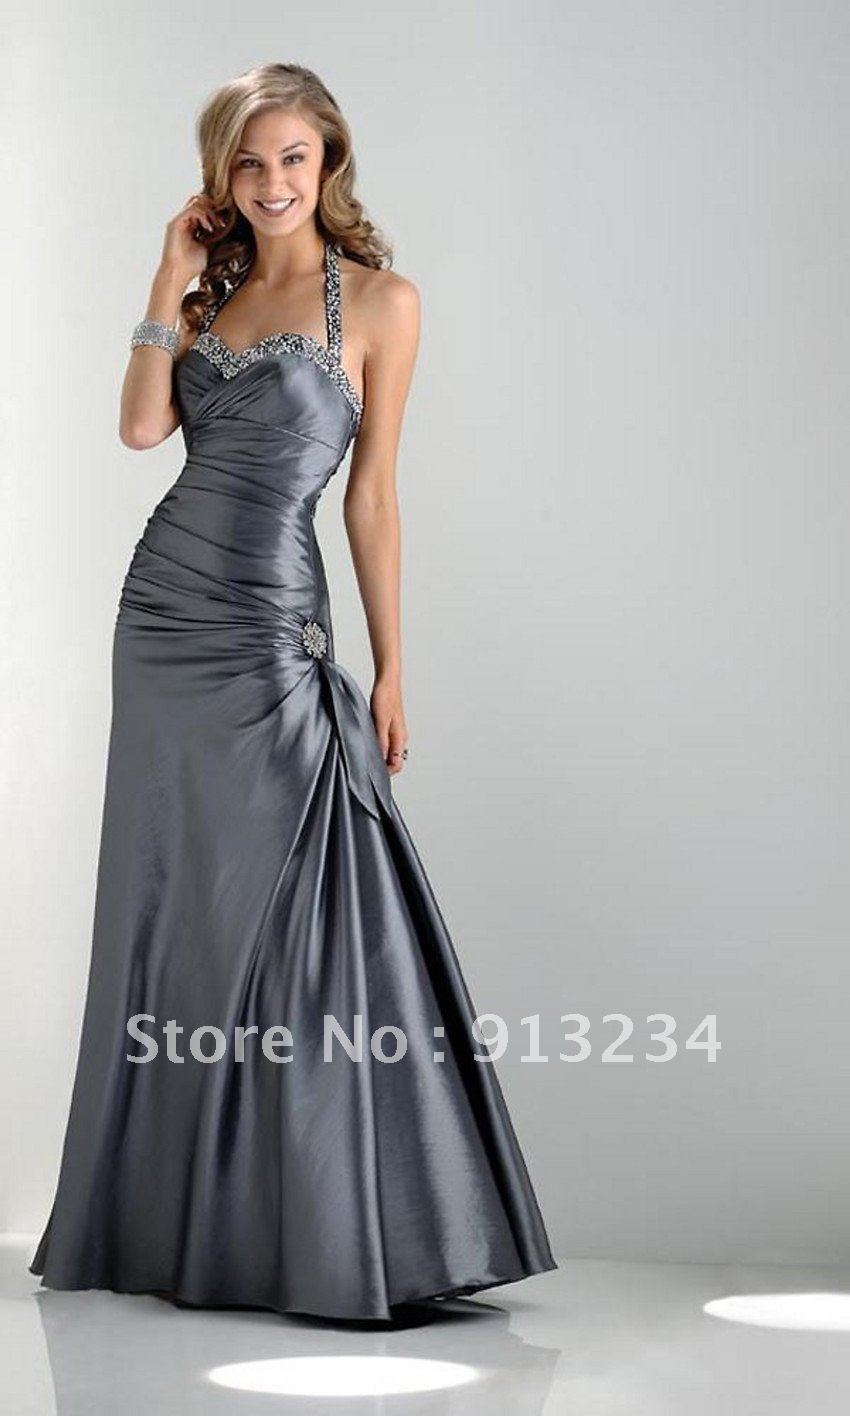 NEW Free shipping 2013 Elegant Gray full length Beading ruched halter taffeta celebrity party dresses evening gowns 081